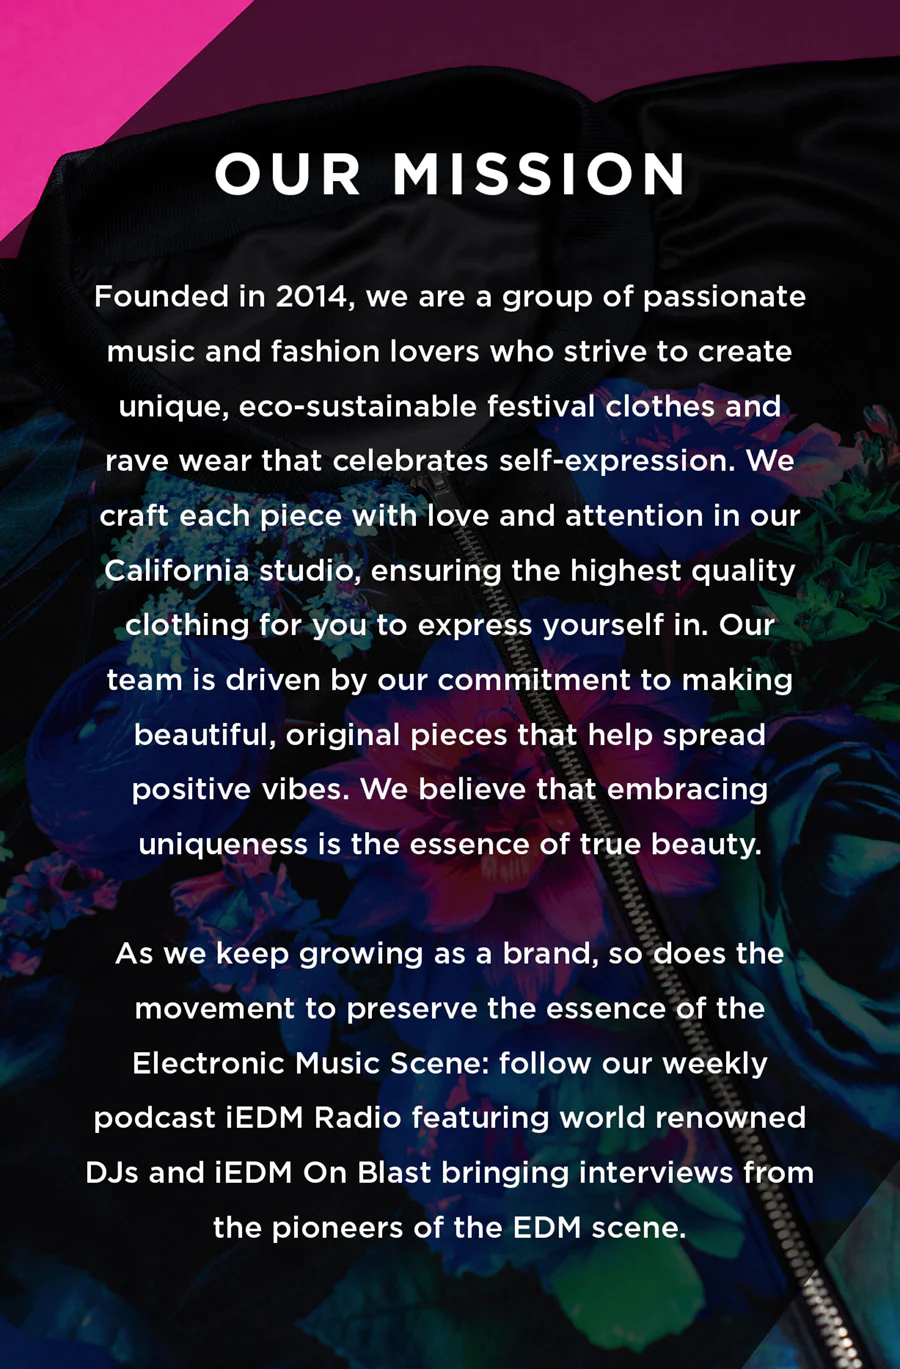 iEDM was founded by passionate EDM fans